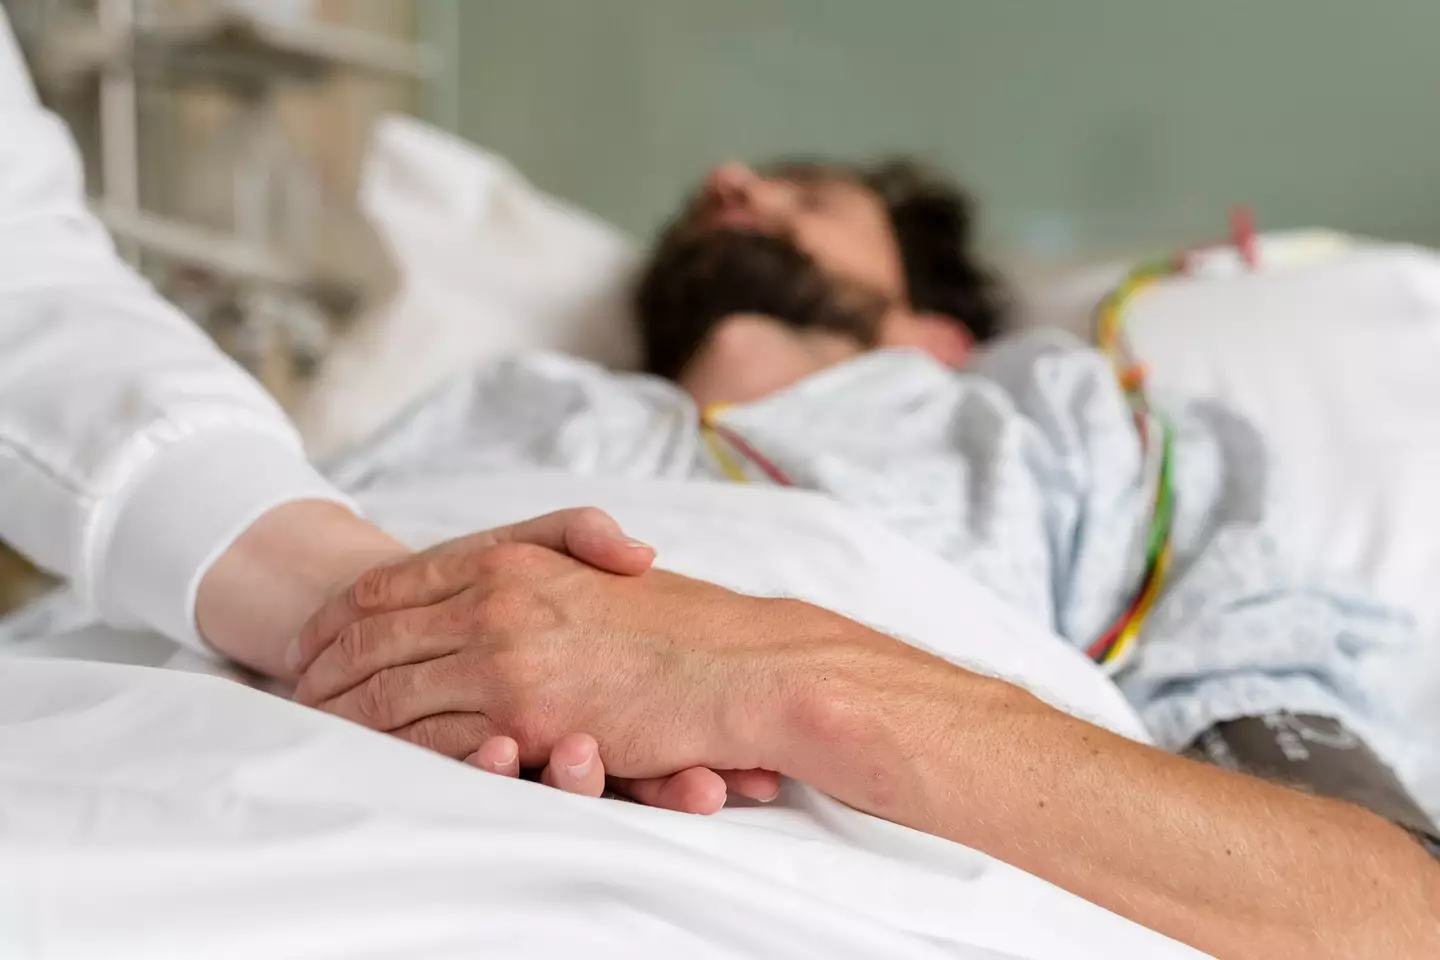 The couple saw assisted suicide as the only way to end their suffering. (Getty Stock Image)